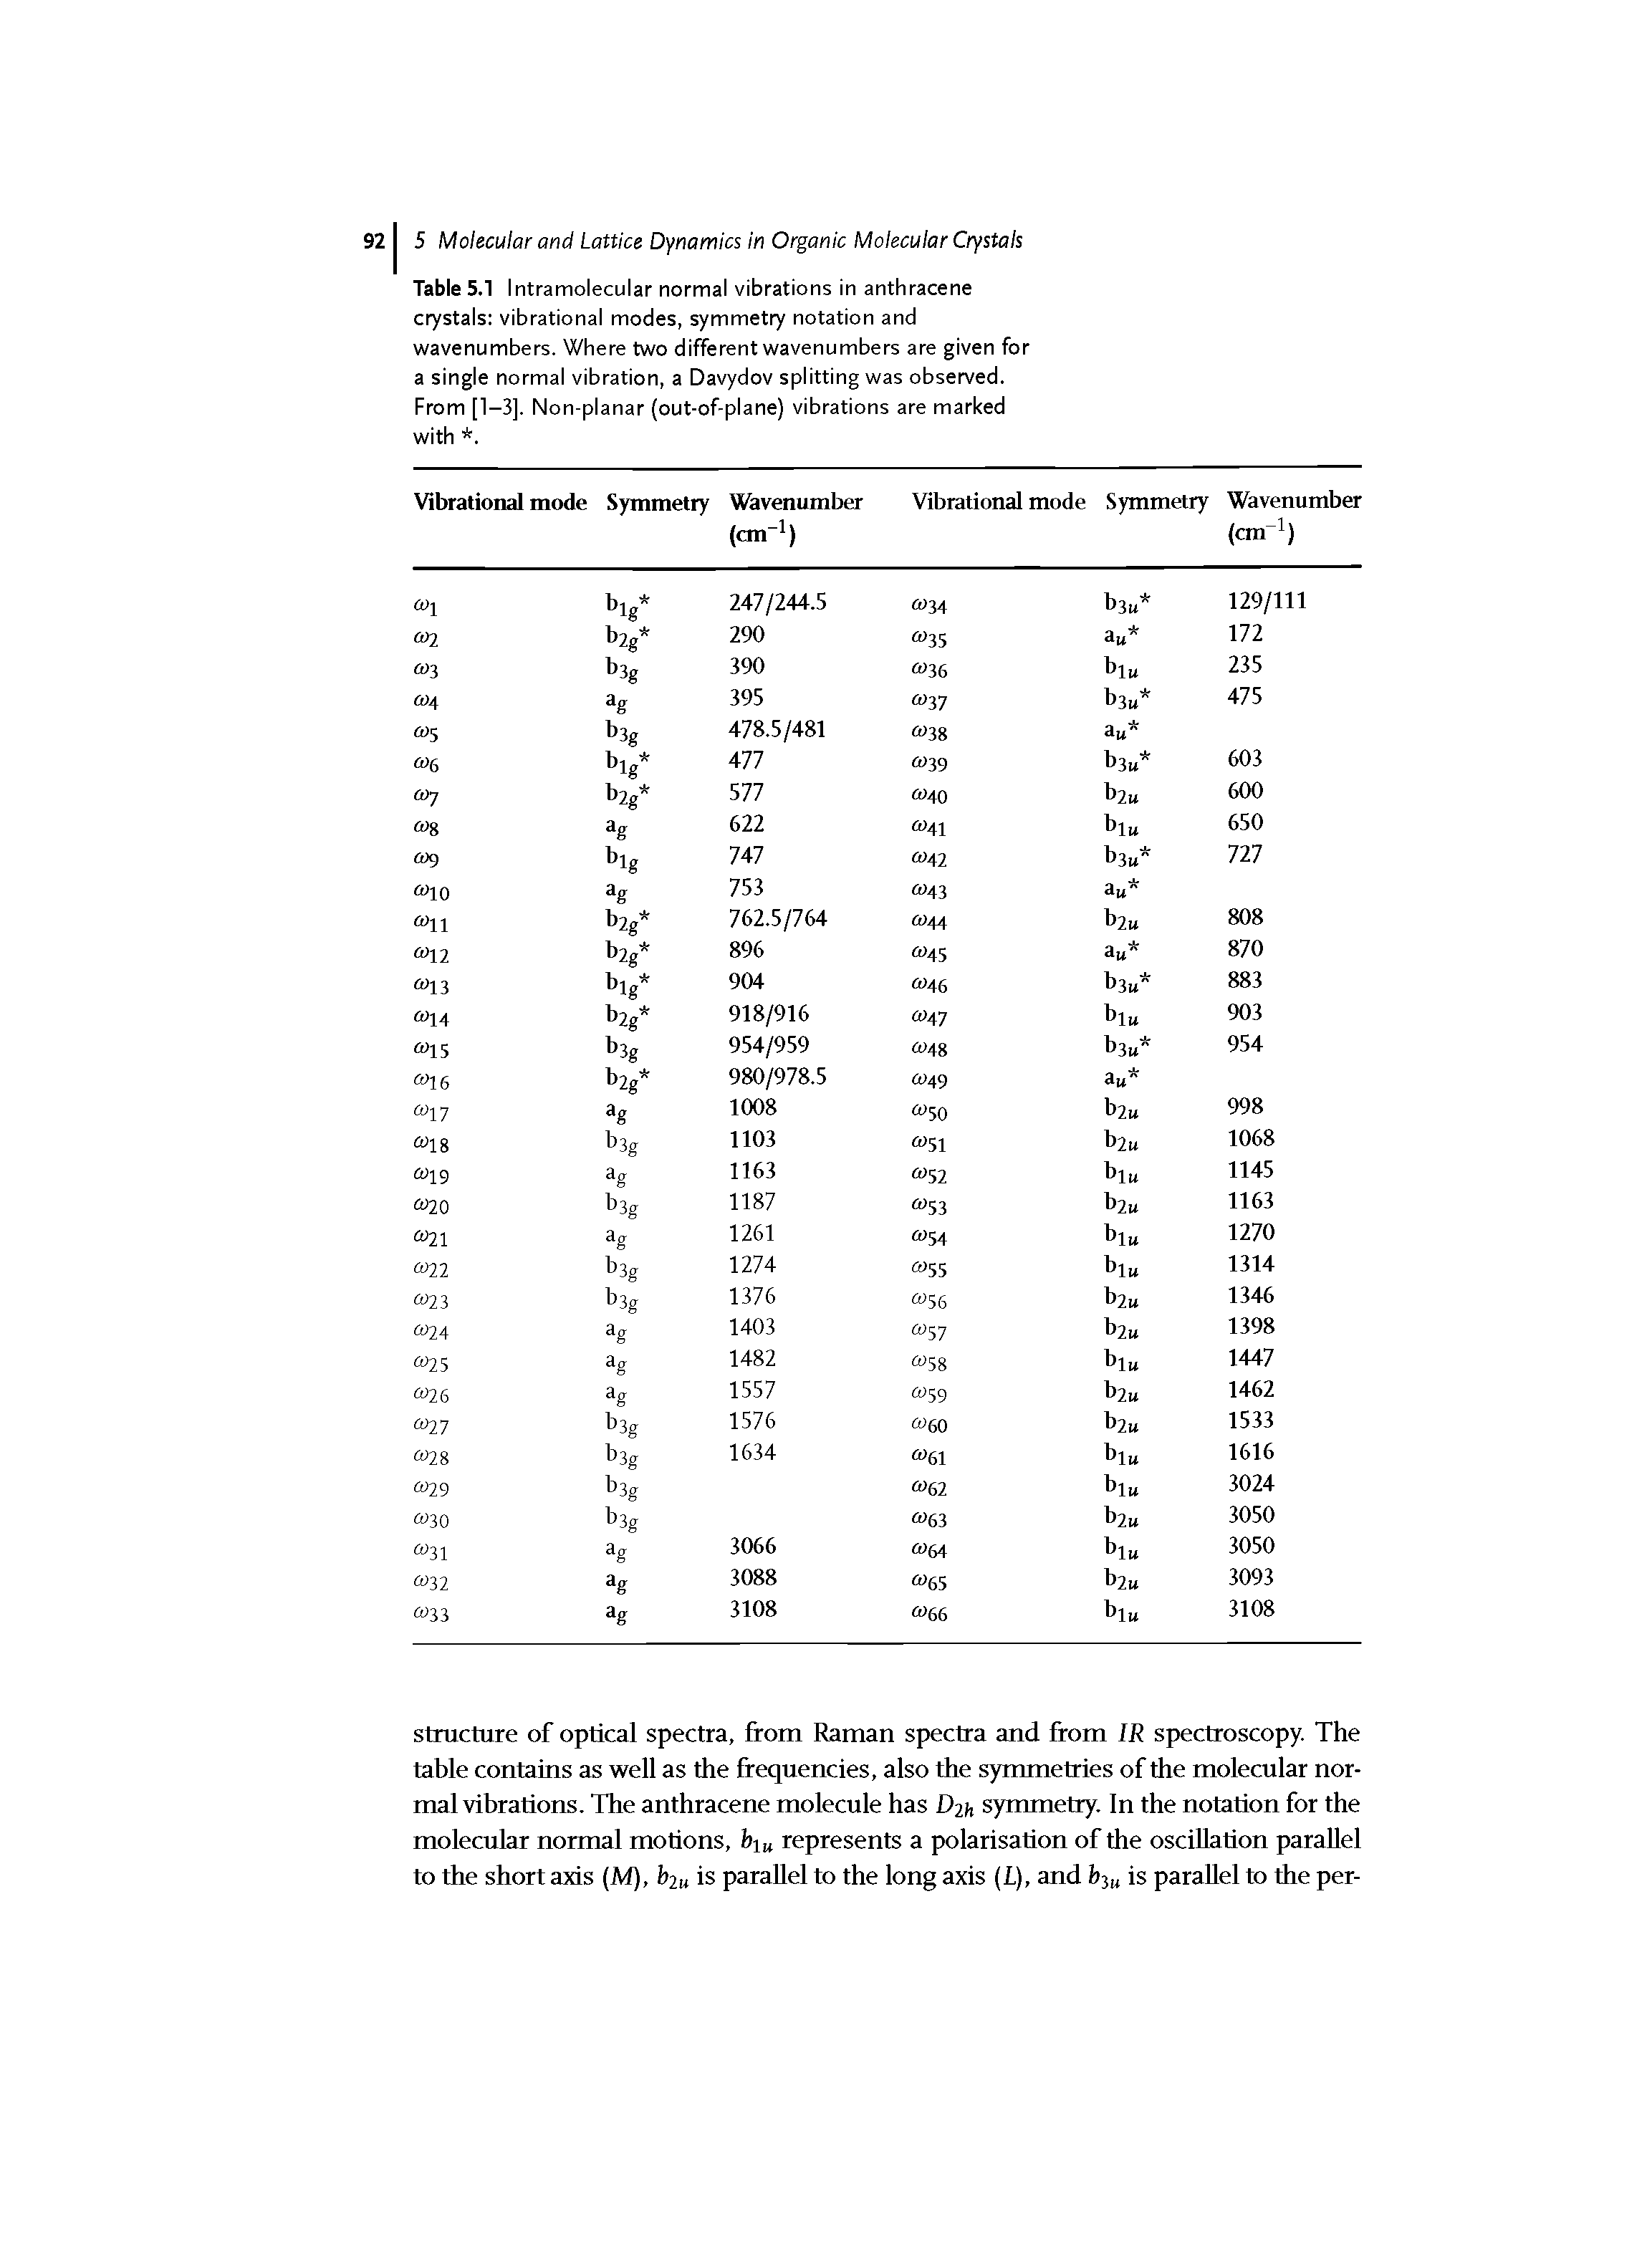 Table 5.1 Intramolecular normal vibrations in anthracene crystals vibrational modes, symmetry notation and wavenumbers. Where two different wavenumbers are given for a single normal vibration, a Davydov splitting was observed. From [1-3]. Non-planar (out-of-plane) vibrations are marked with. ...